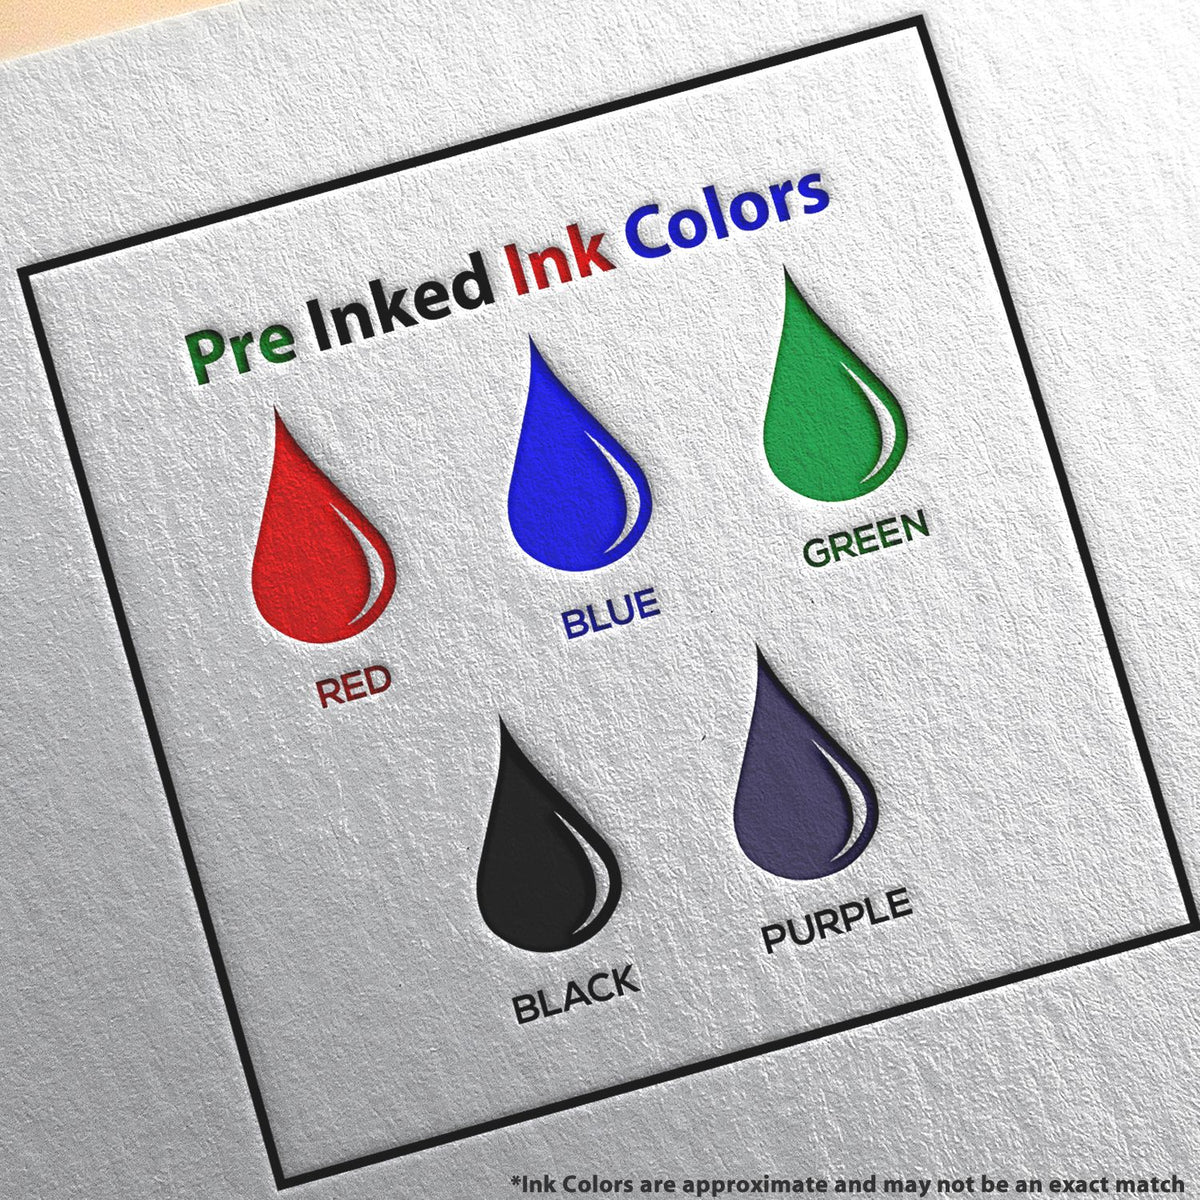 A picture showing the different ink colors or hues available for the MaxLight Premium Pre-Inked Georgia Rectangular Notarial Stamp product.